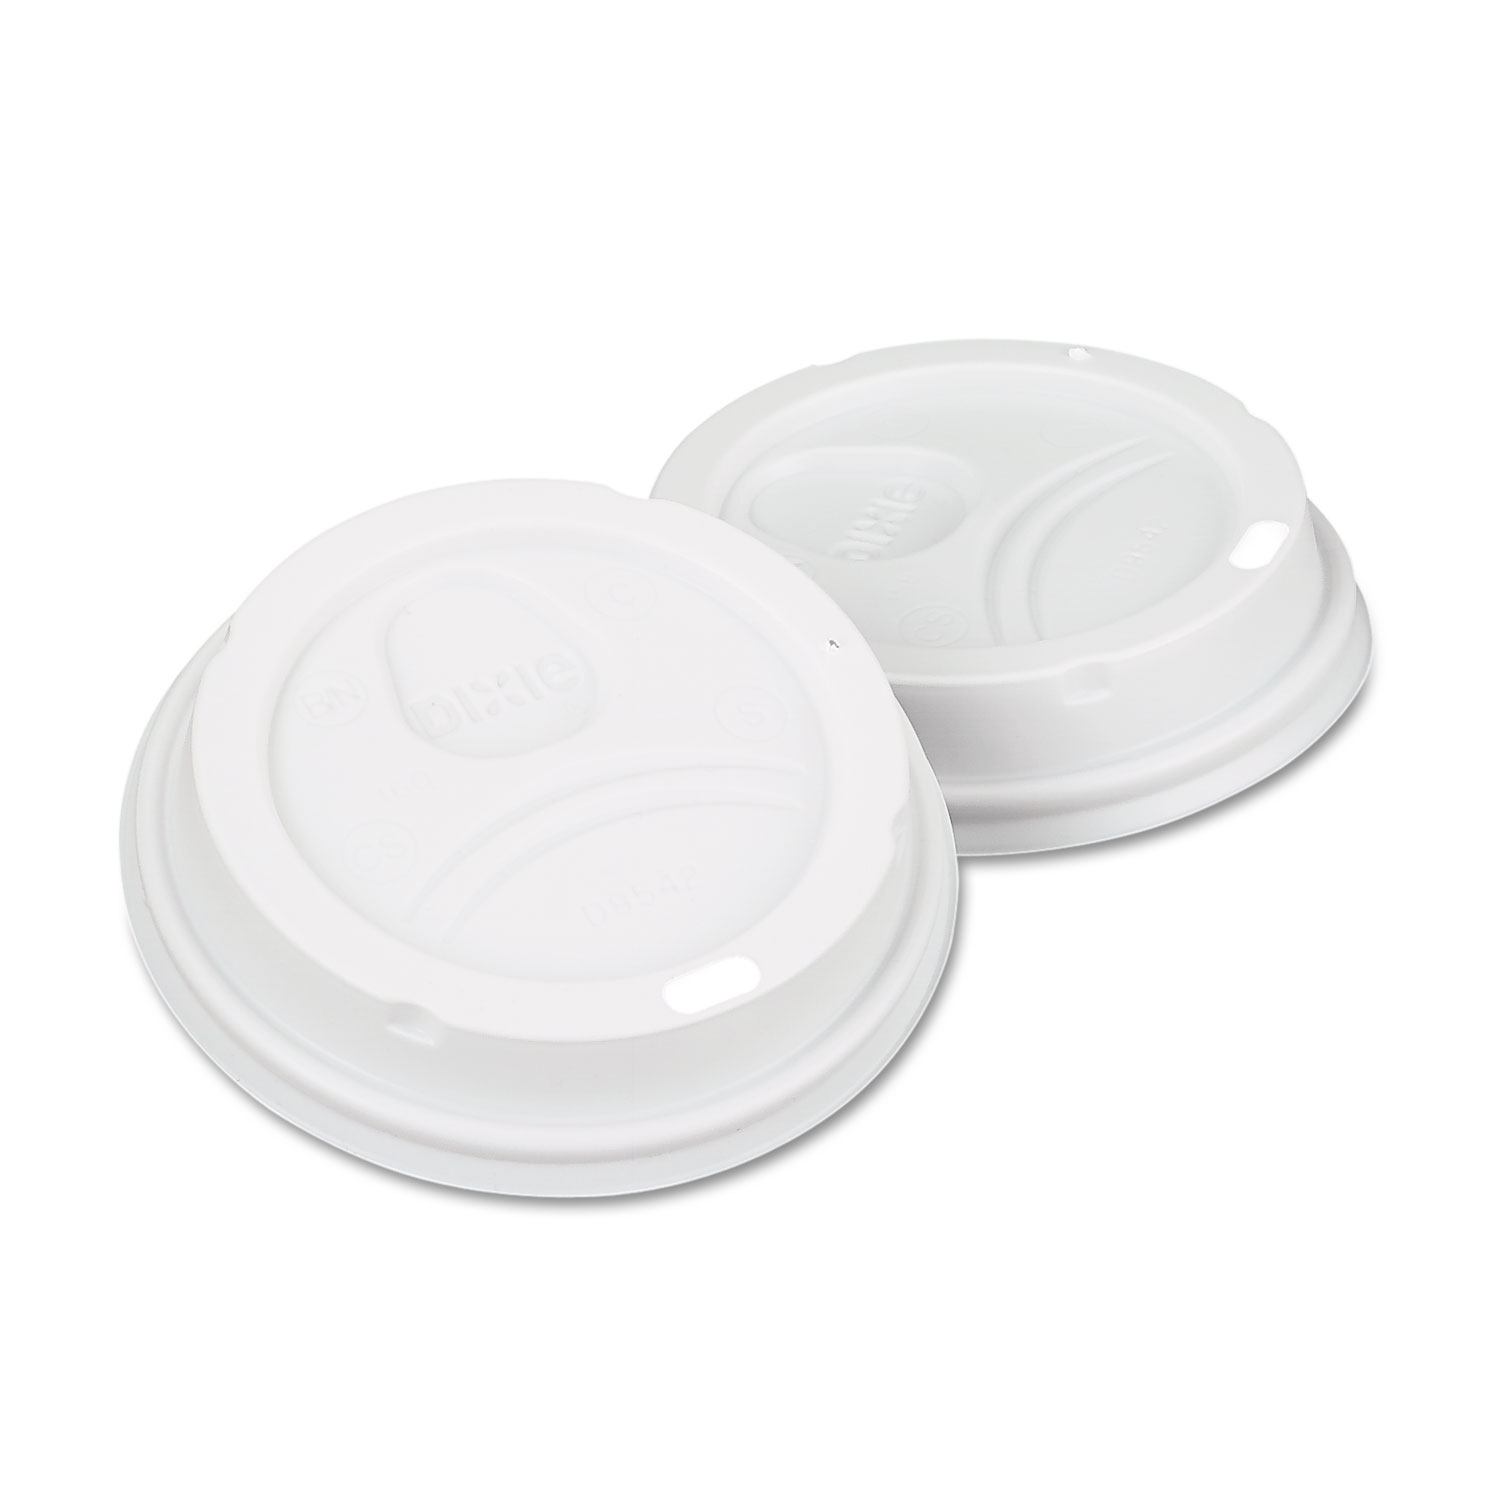  Dixie 9542500DX Dome Drink-Thru Lids,10-16 oz Perfectouch;12-20 oz WiseSize Cup, White, 50/Pack (DXE9542500DXPK) 